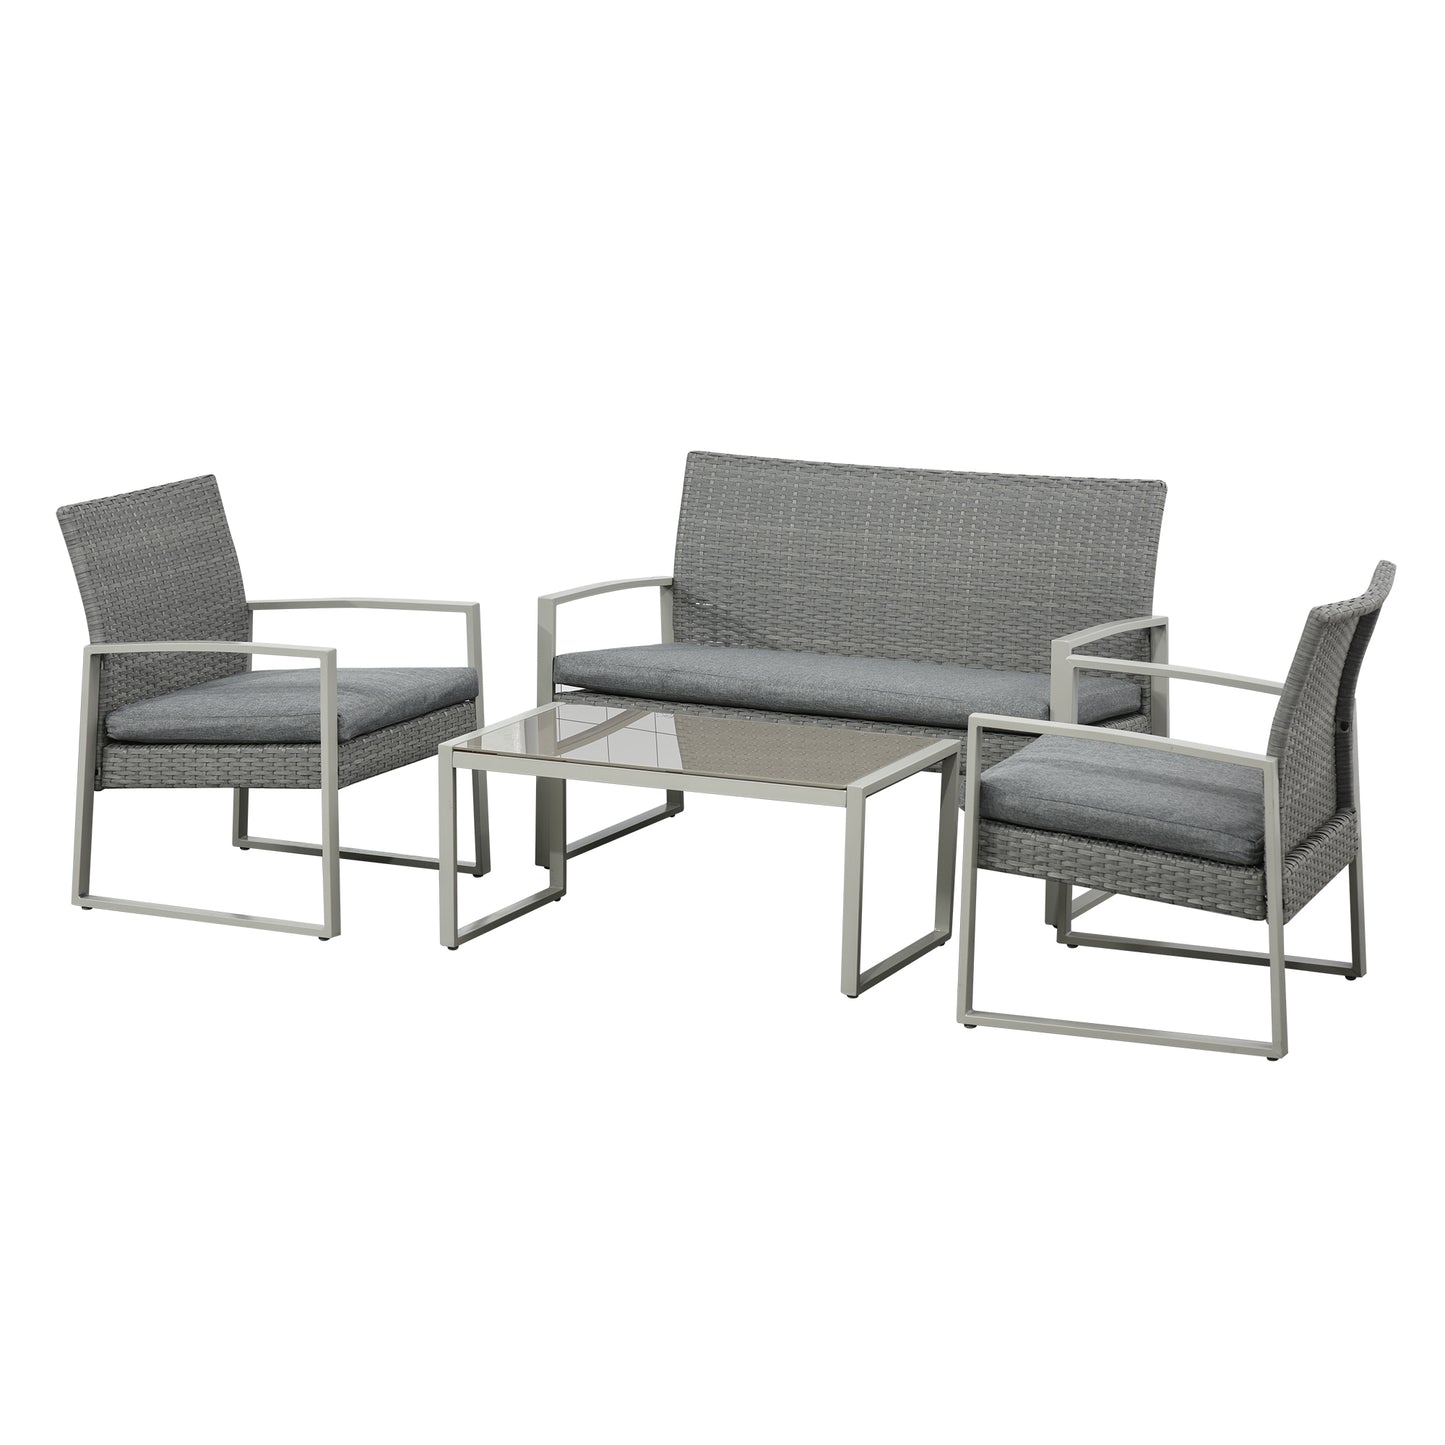 Outsunny 4 PCs PE Rattan Wicker Sofa Set Outdoor Conservatory Furniture Lawn Patio Coffee Table w/ Cushion, Grey